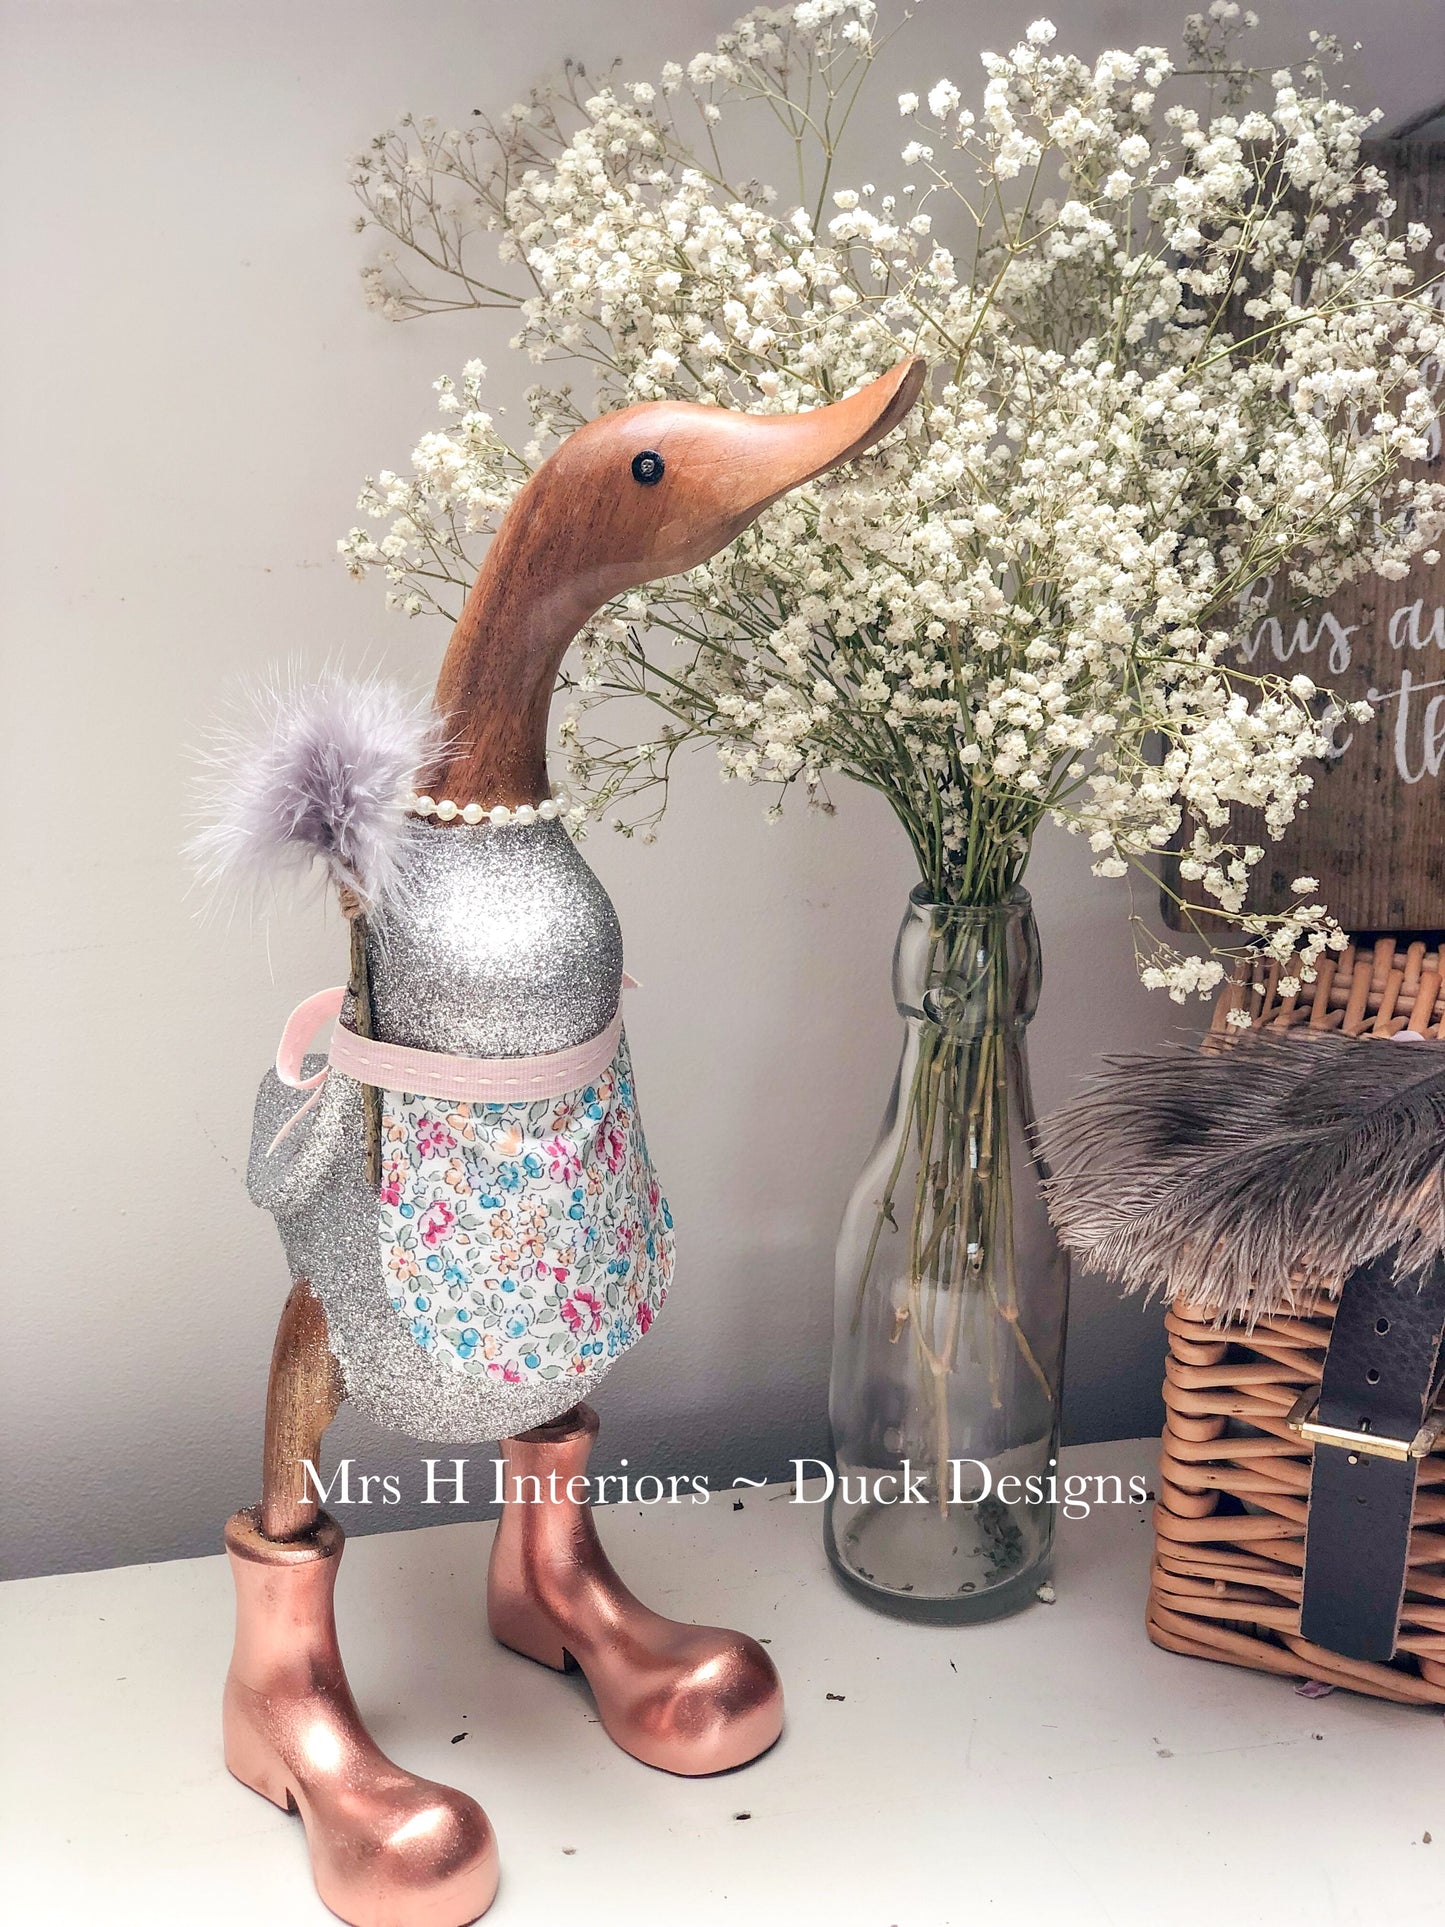 The House Keeper - Decorated Wooden Duck in Boots by Mrs H the Duck Lady